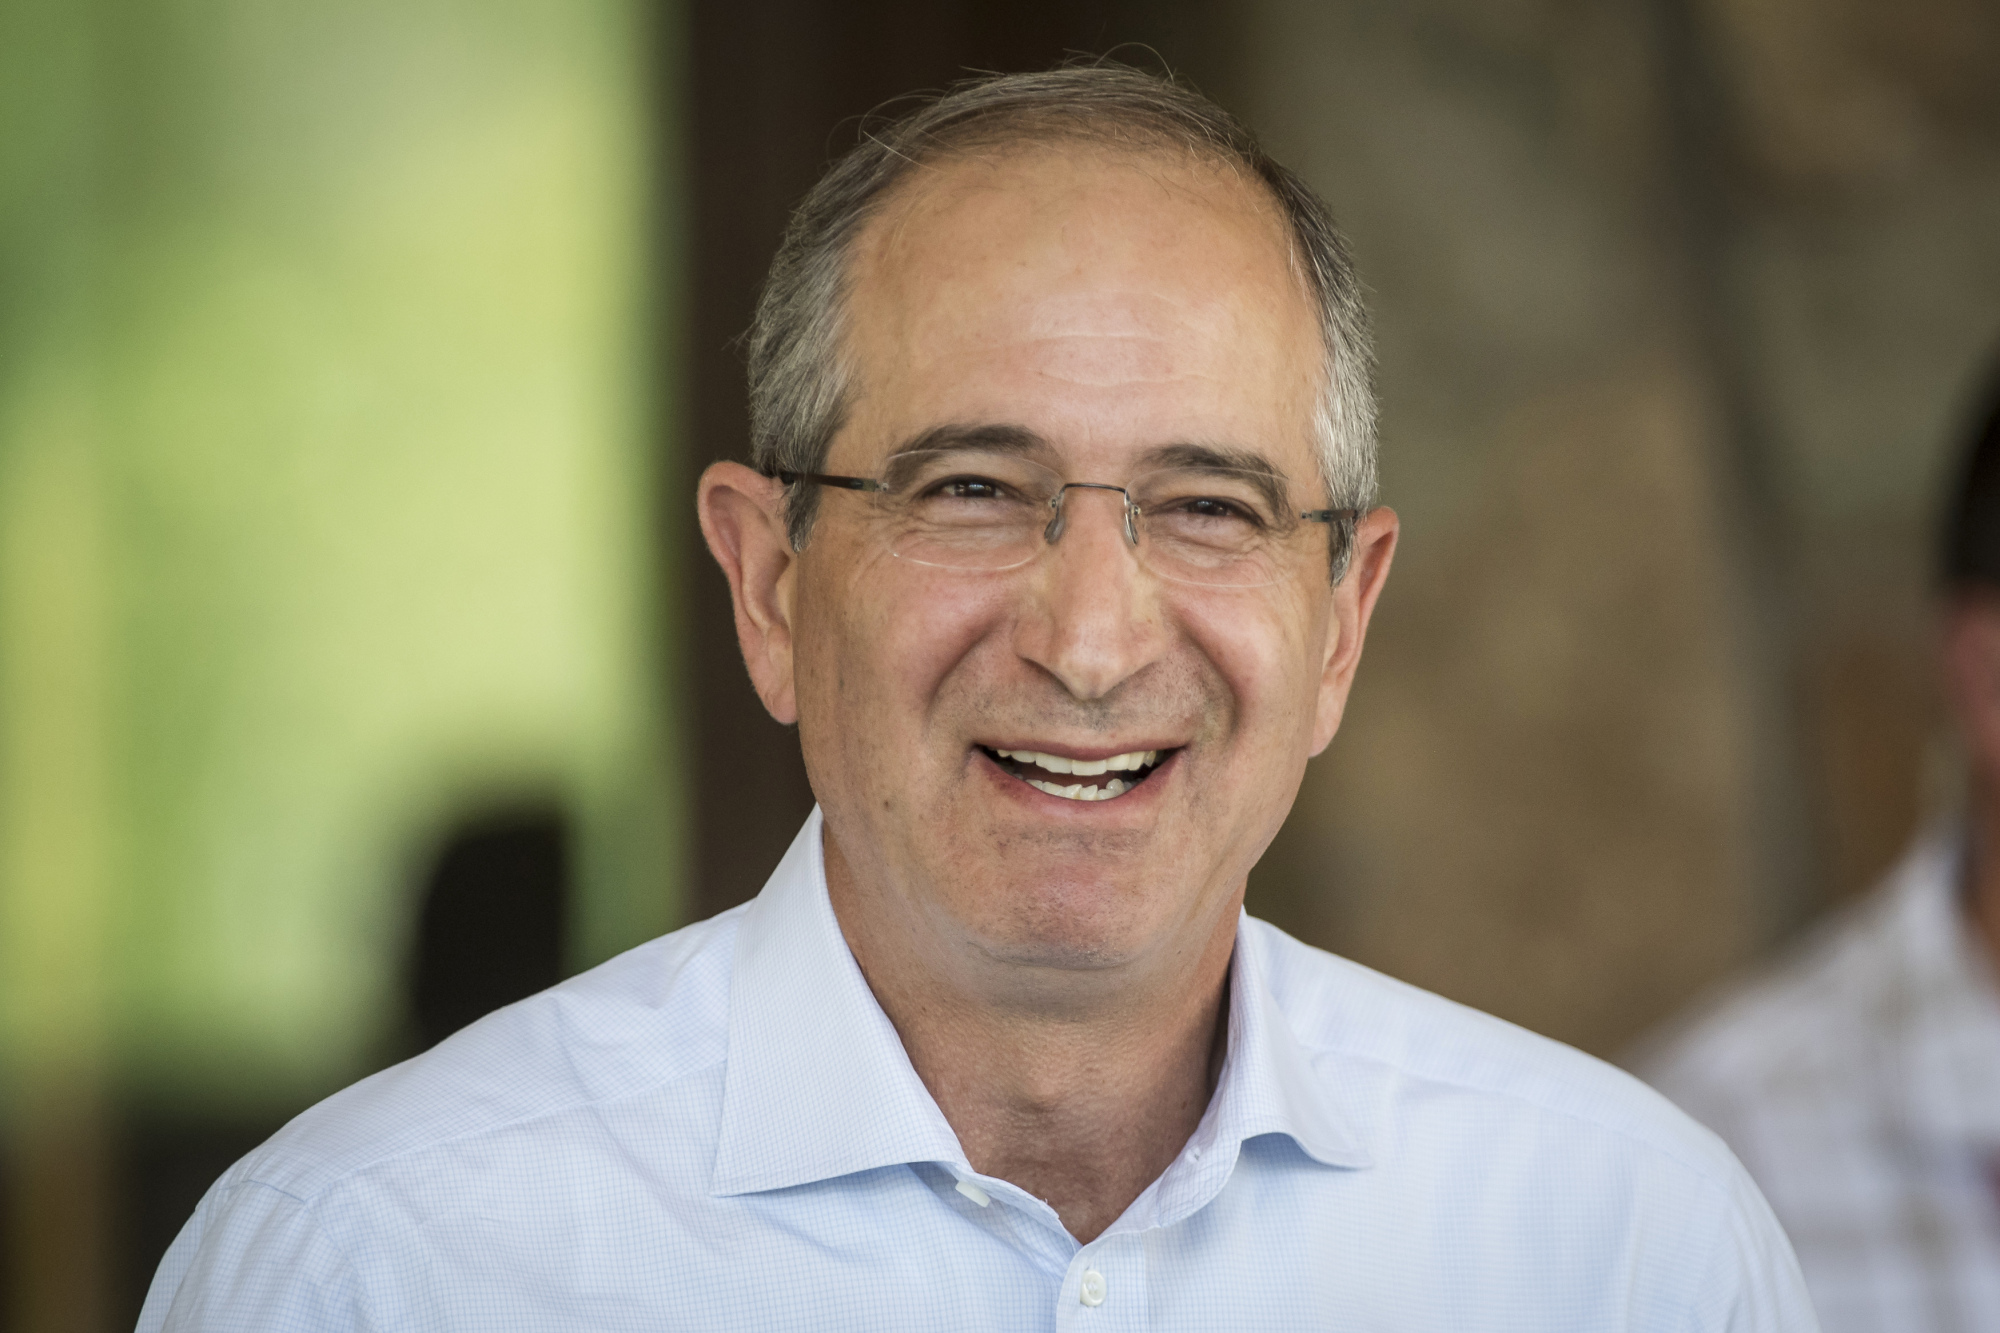 Comcast CEO Brian Roberts: Sky Is a Great Opportunity but Not a 'Necessity